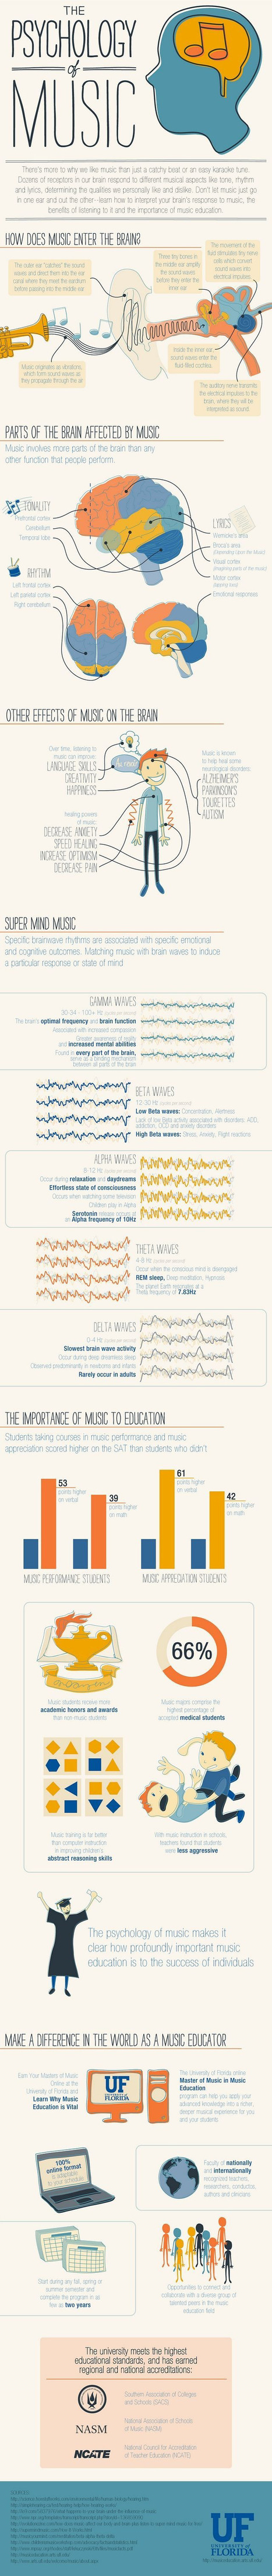 A Wonderful Graphic Featuring The Importance of Music in Education [Infographic] | E-Learning-Inclusivo (Mashup) | Scoop.it